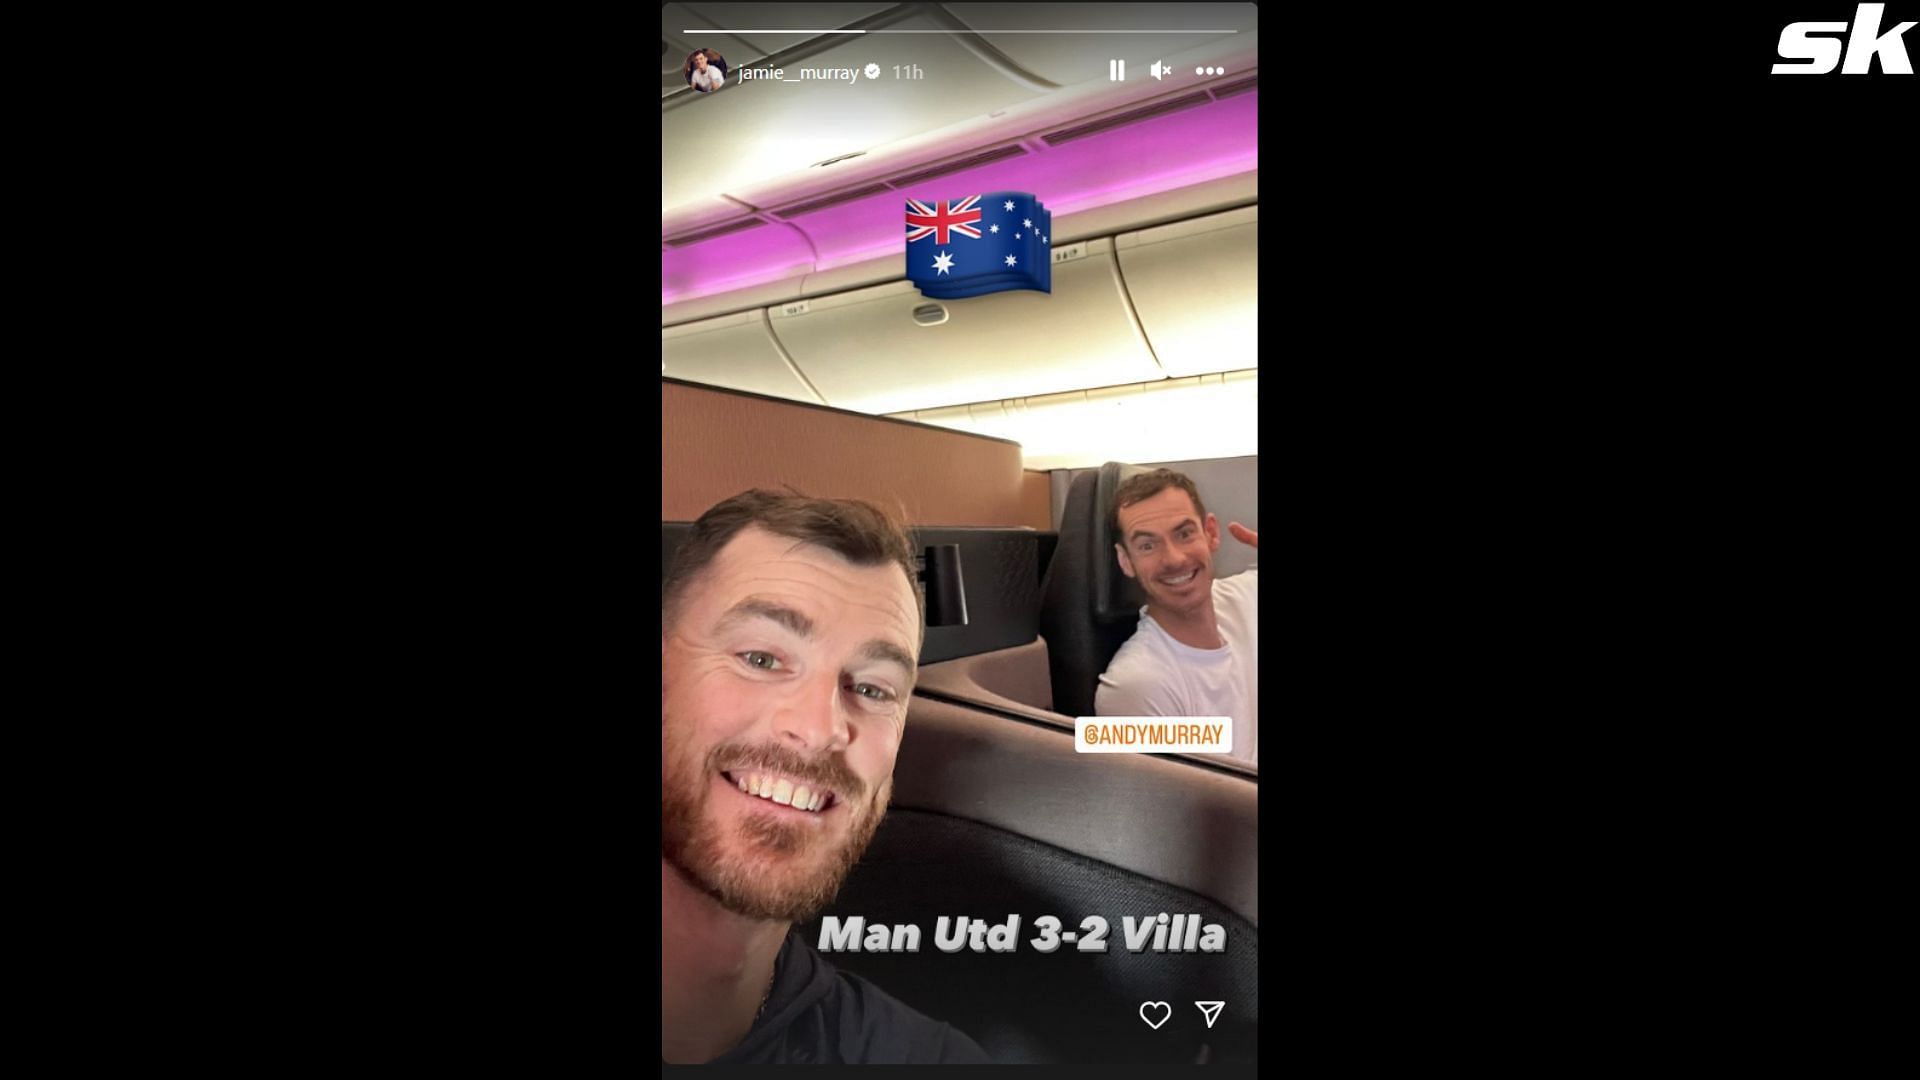 Brother Andy and Jamie Murray celebrate Manchester United&#039;s thrilling win over Aston Villa - @ jamie__murray, Instagram